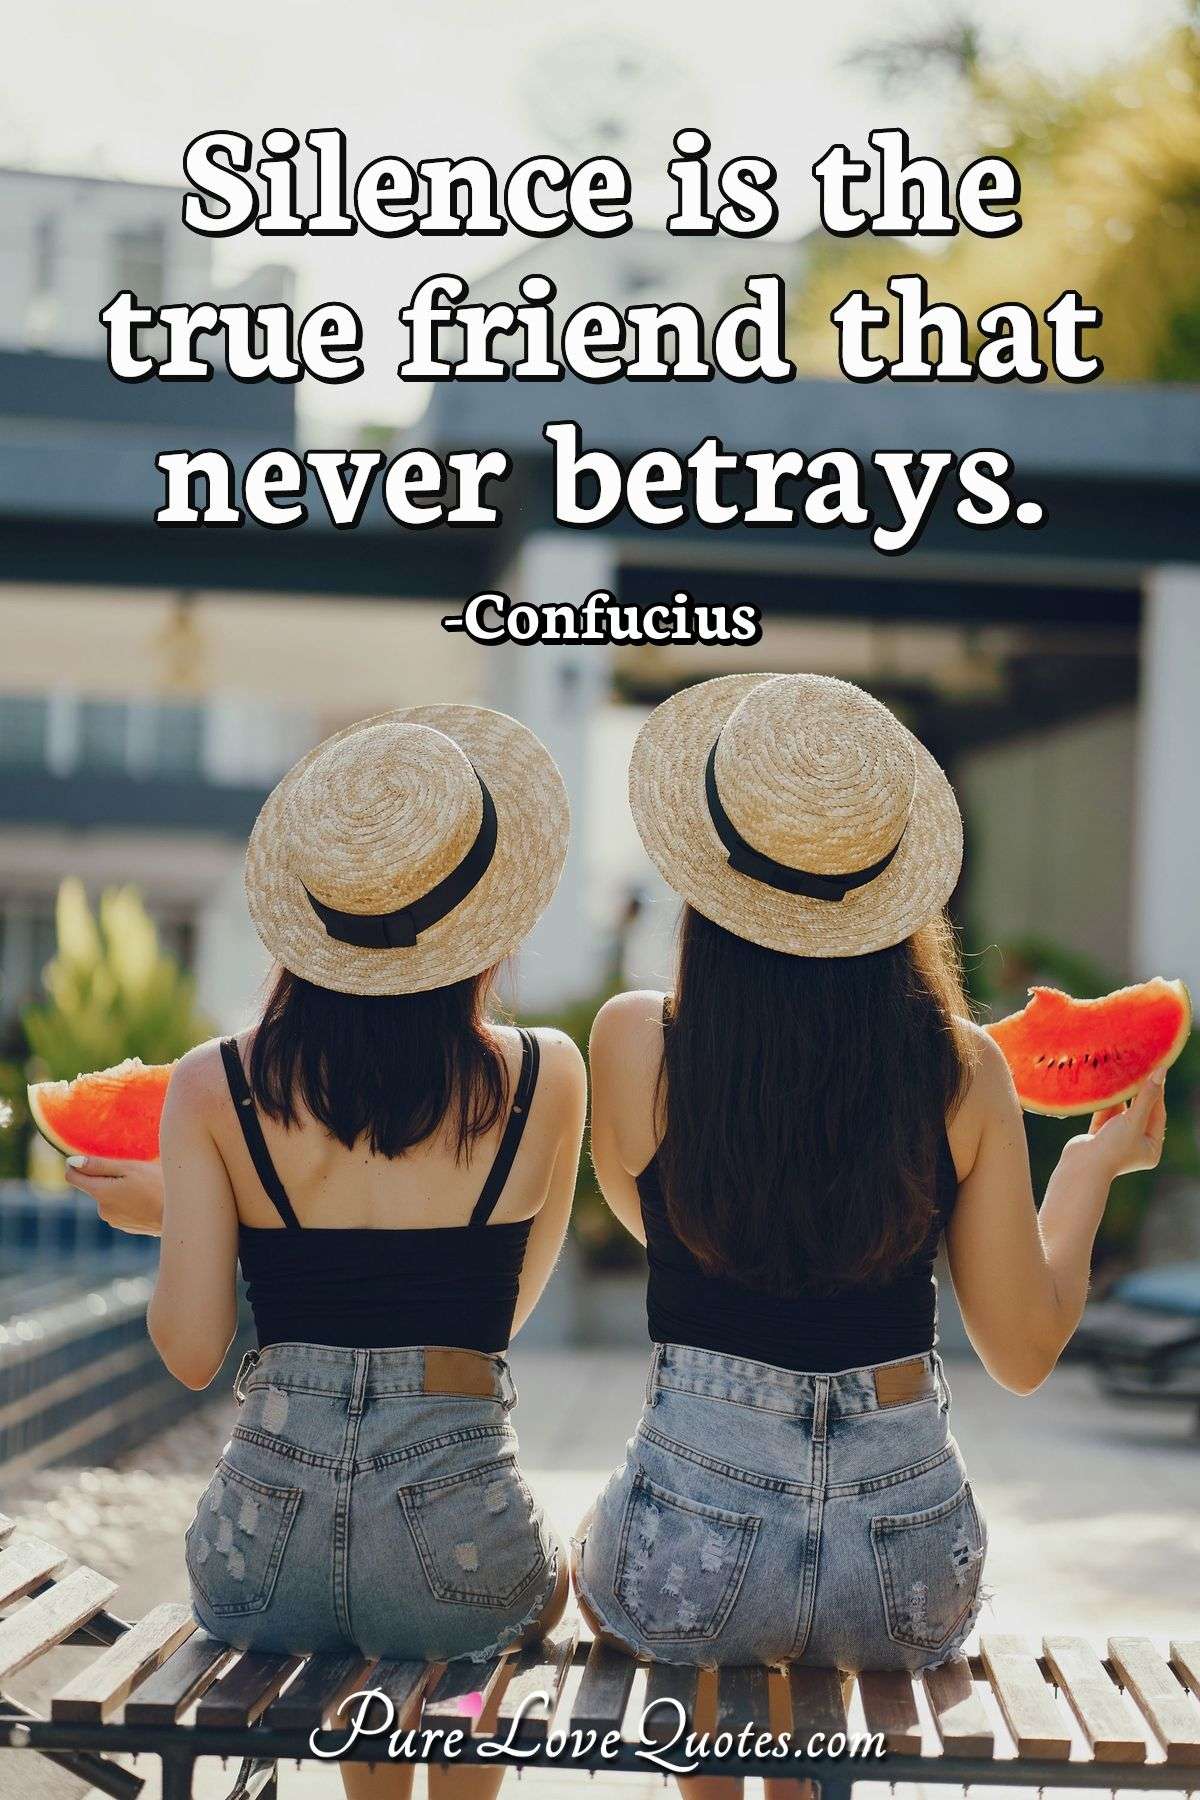 Silence is the true friend that never betrays. | PureLoveQuotes